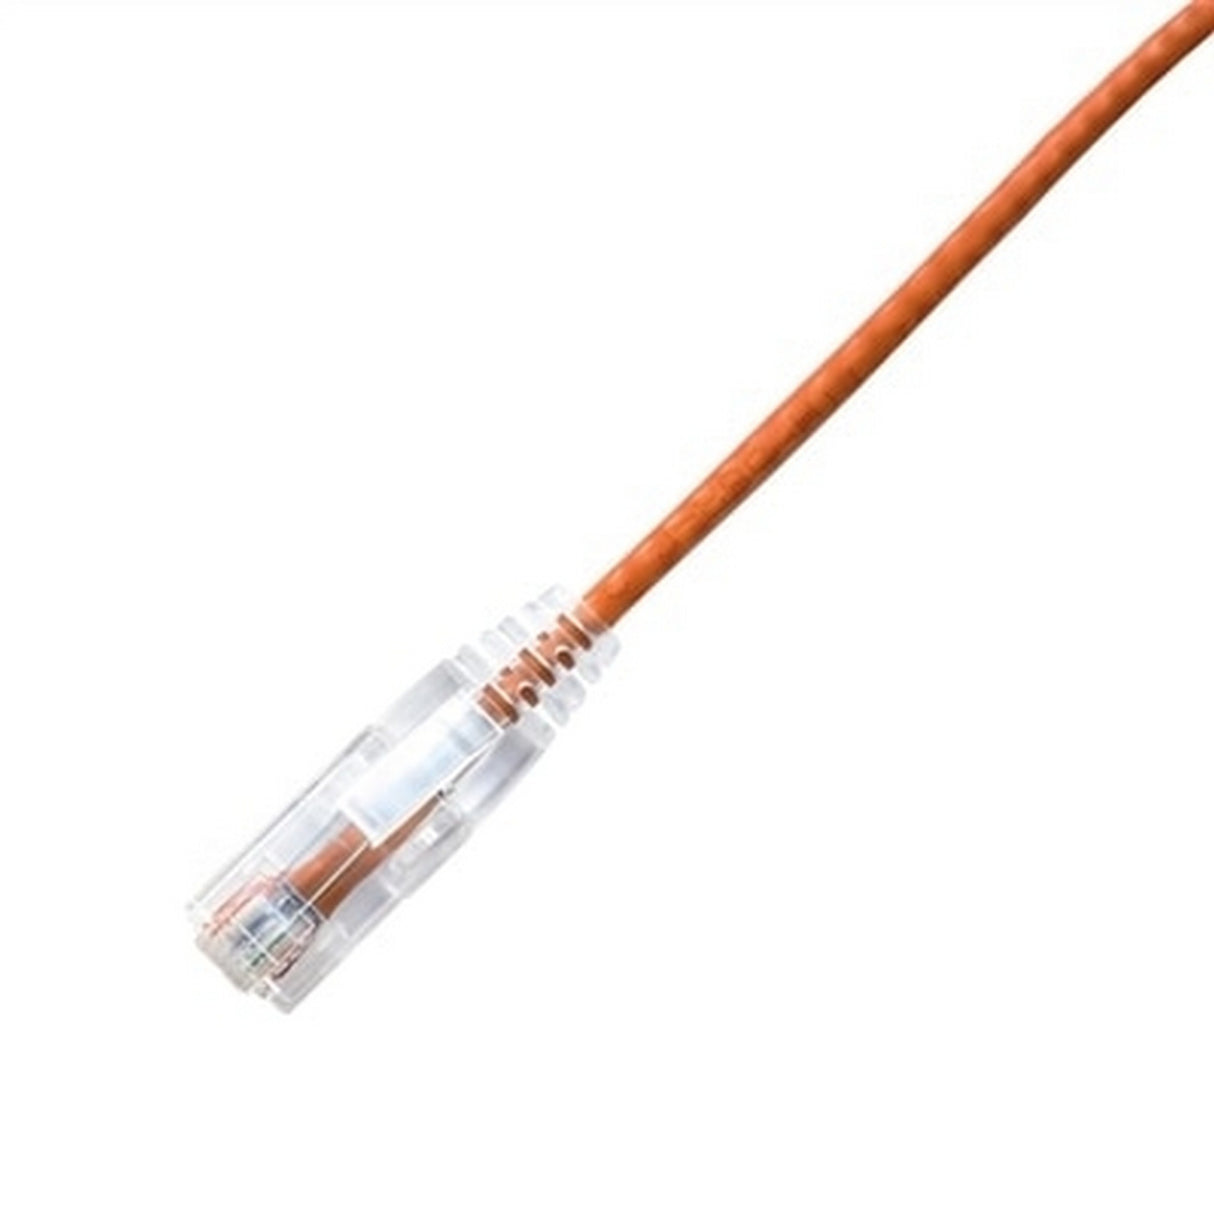 LYNN CPCS-AOR-025F CHOICE Slim 28AWG CAT6A Ethernet Patch Cable, 25-Foot, Orange